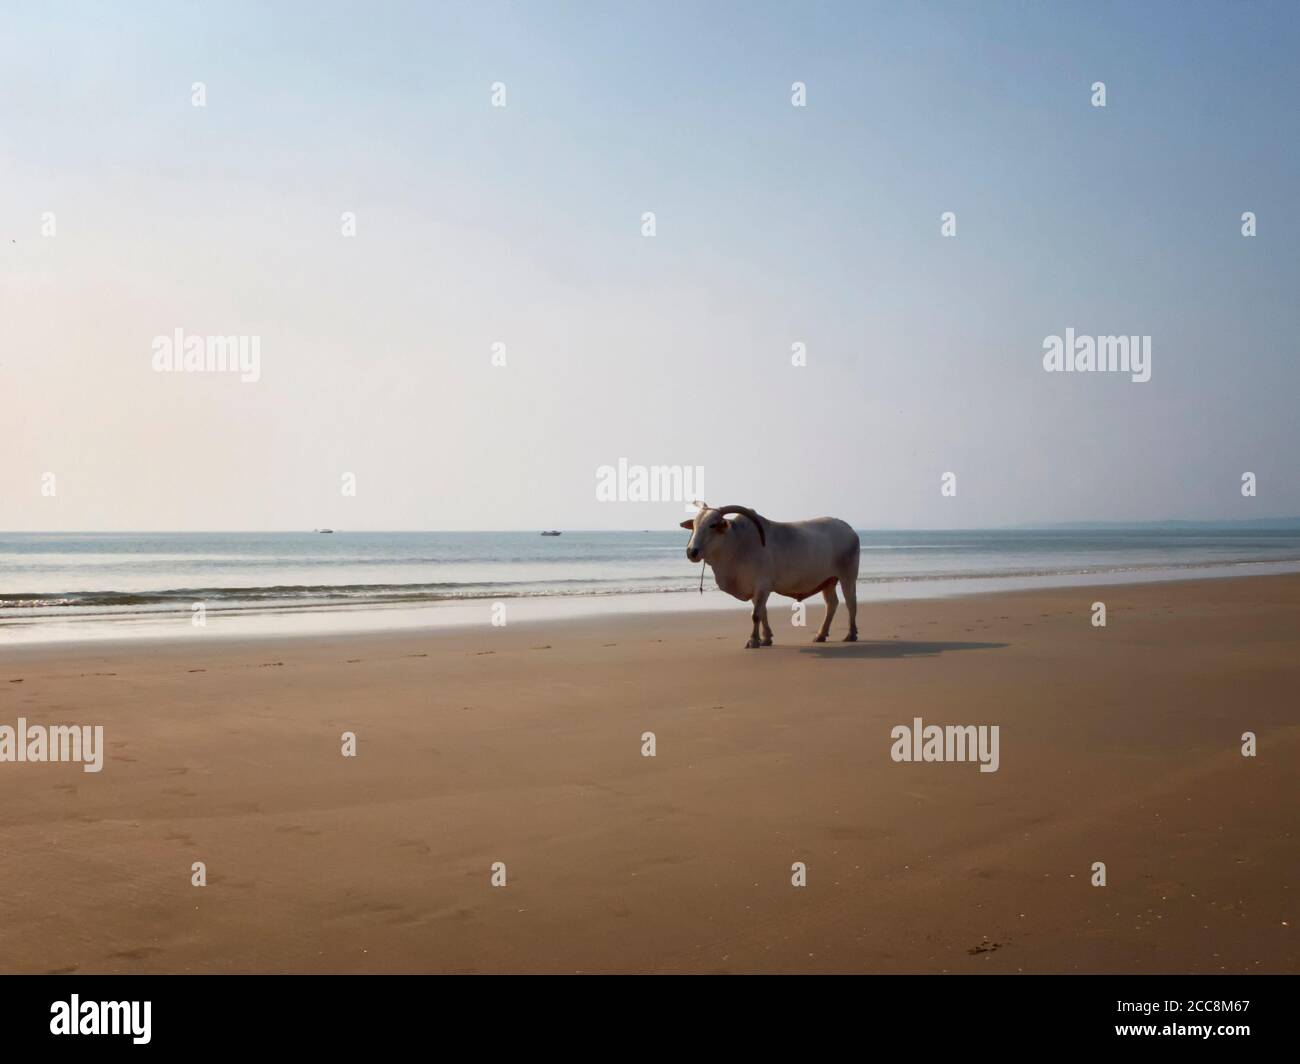 White horned bull stands on the sandy beach opposite the sea. Indian cow, holy cow, sacred animal. Stock Photo